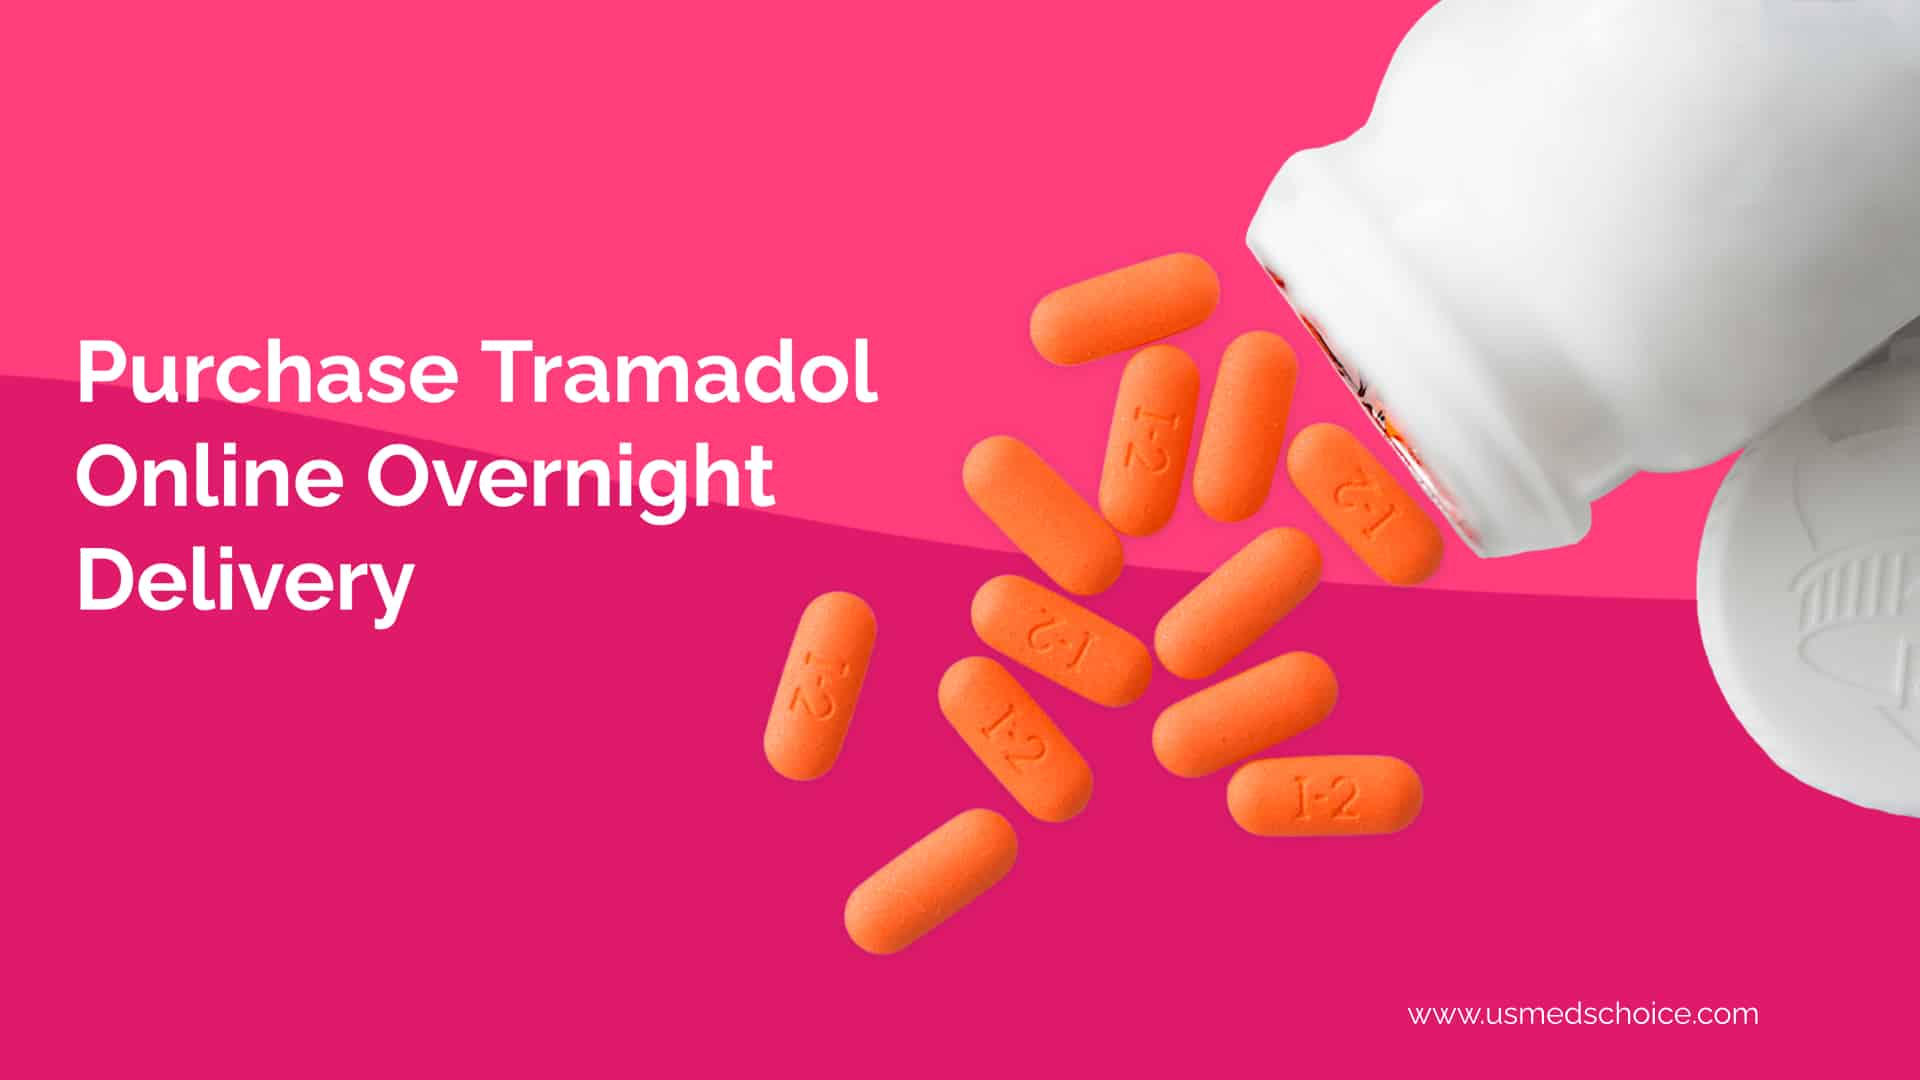 Purchase Tramadol Online to Get Rid of Dental and Fibromyalgia Pain